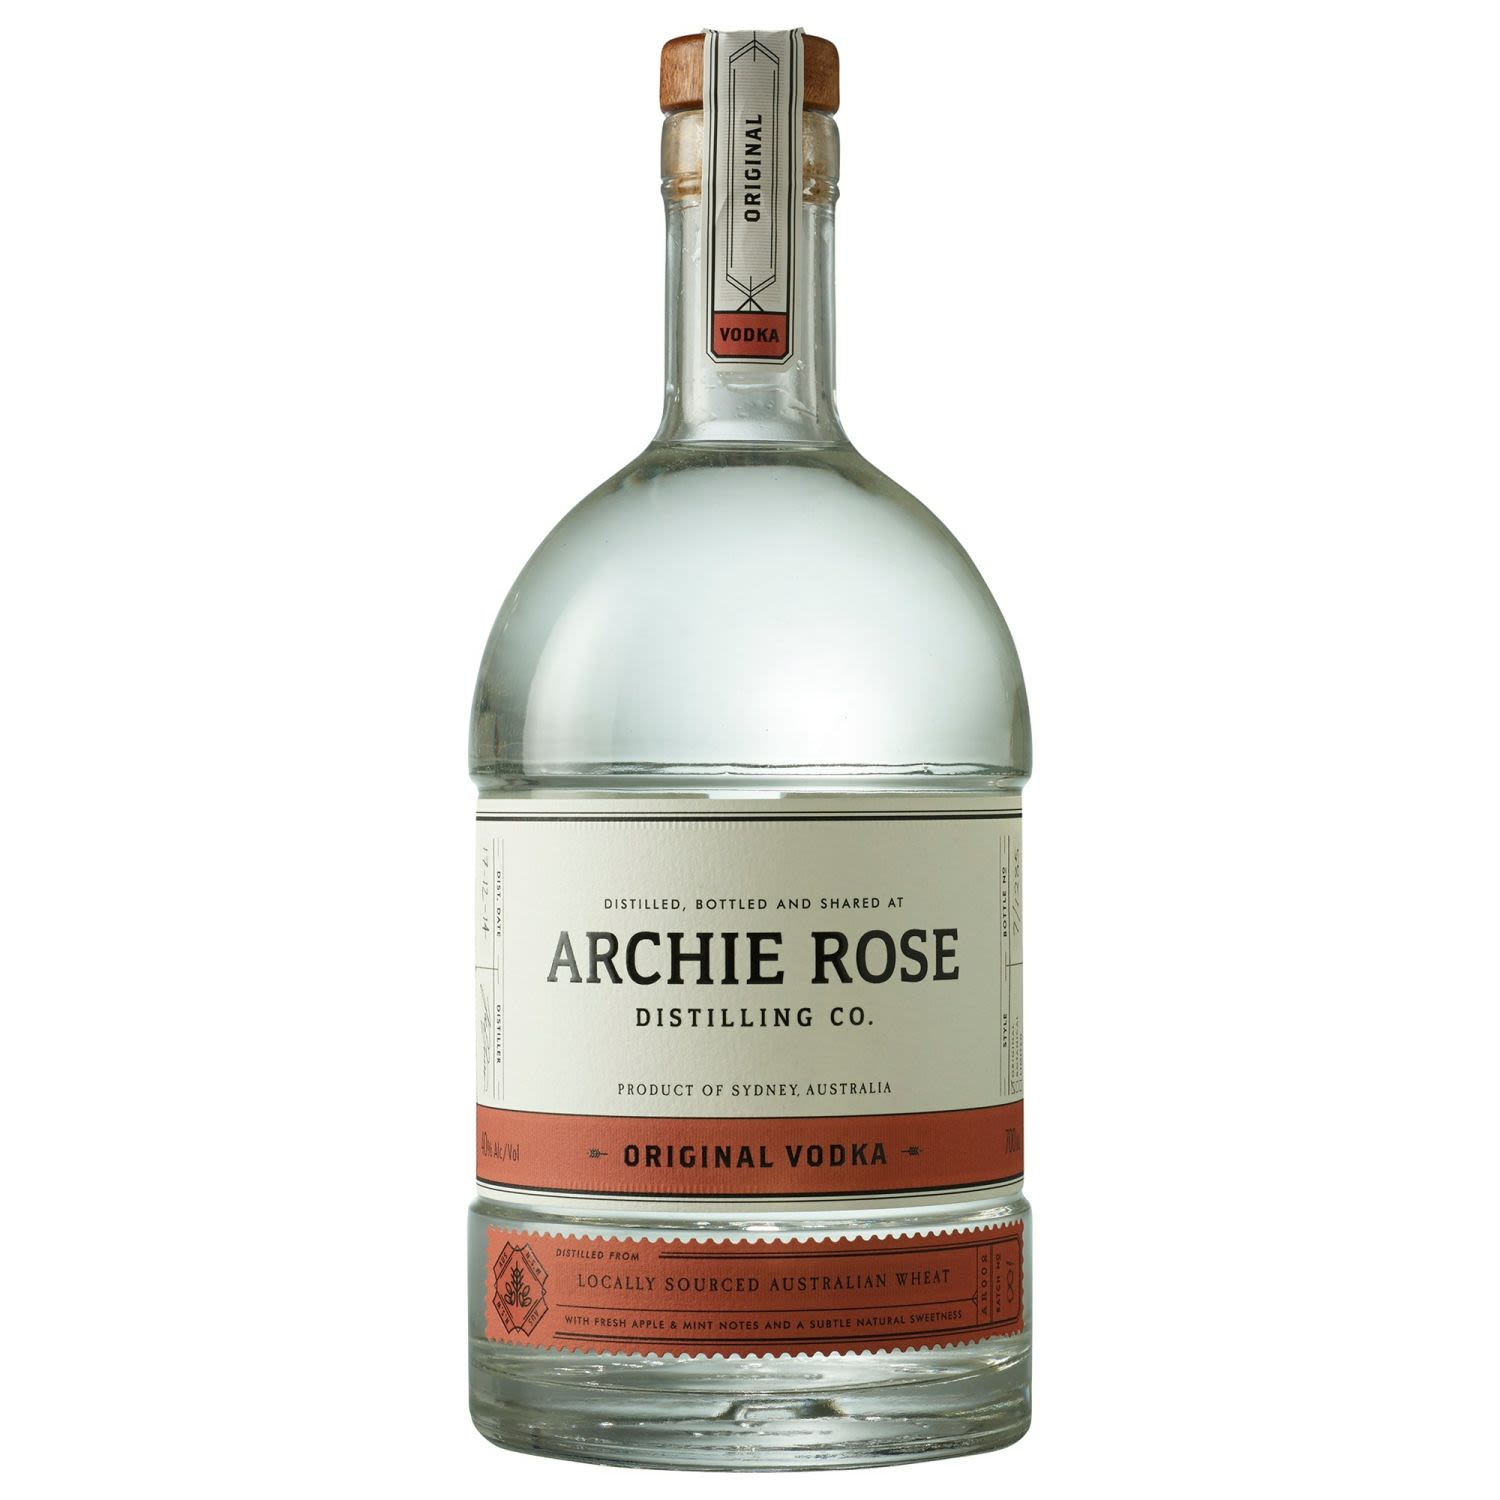 Launched in March 2015, Archie Rose Distilling Co. is the first independent distillery and bar to open in the City of Sydney in over 160 years. Crafted from Australian wheat, Archie Rose Original Vodka is carefully distilled in a handmade 300L copper pot still constructed in Tasmania by Australia’s only stillmaker. Complex, clean and crisp, with subtle notes of fresh apple and mint, each bottle is individually marked with the distillation date, bottle and batch number, and is perfect for sipping neat or as the base of your favourite cocktail.<br /> <br />Alcohol Volume: 40.00%<br /><br />Pack Format: Bottle<br /><br />Standard Drinks: 22.1</br /><br />Pack Type: Bottle<br /><br />Country of Origin: Australia<br />